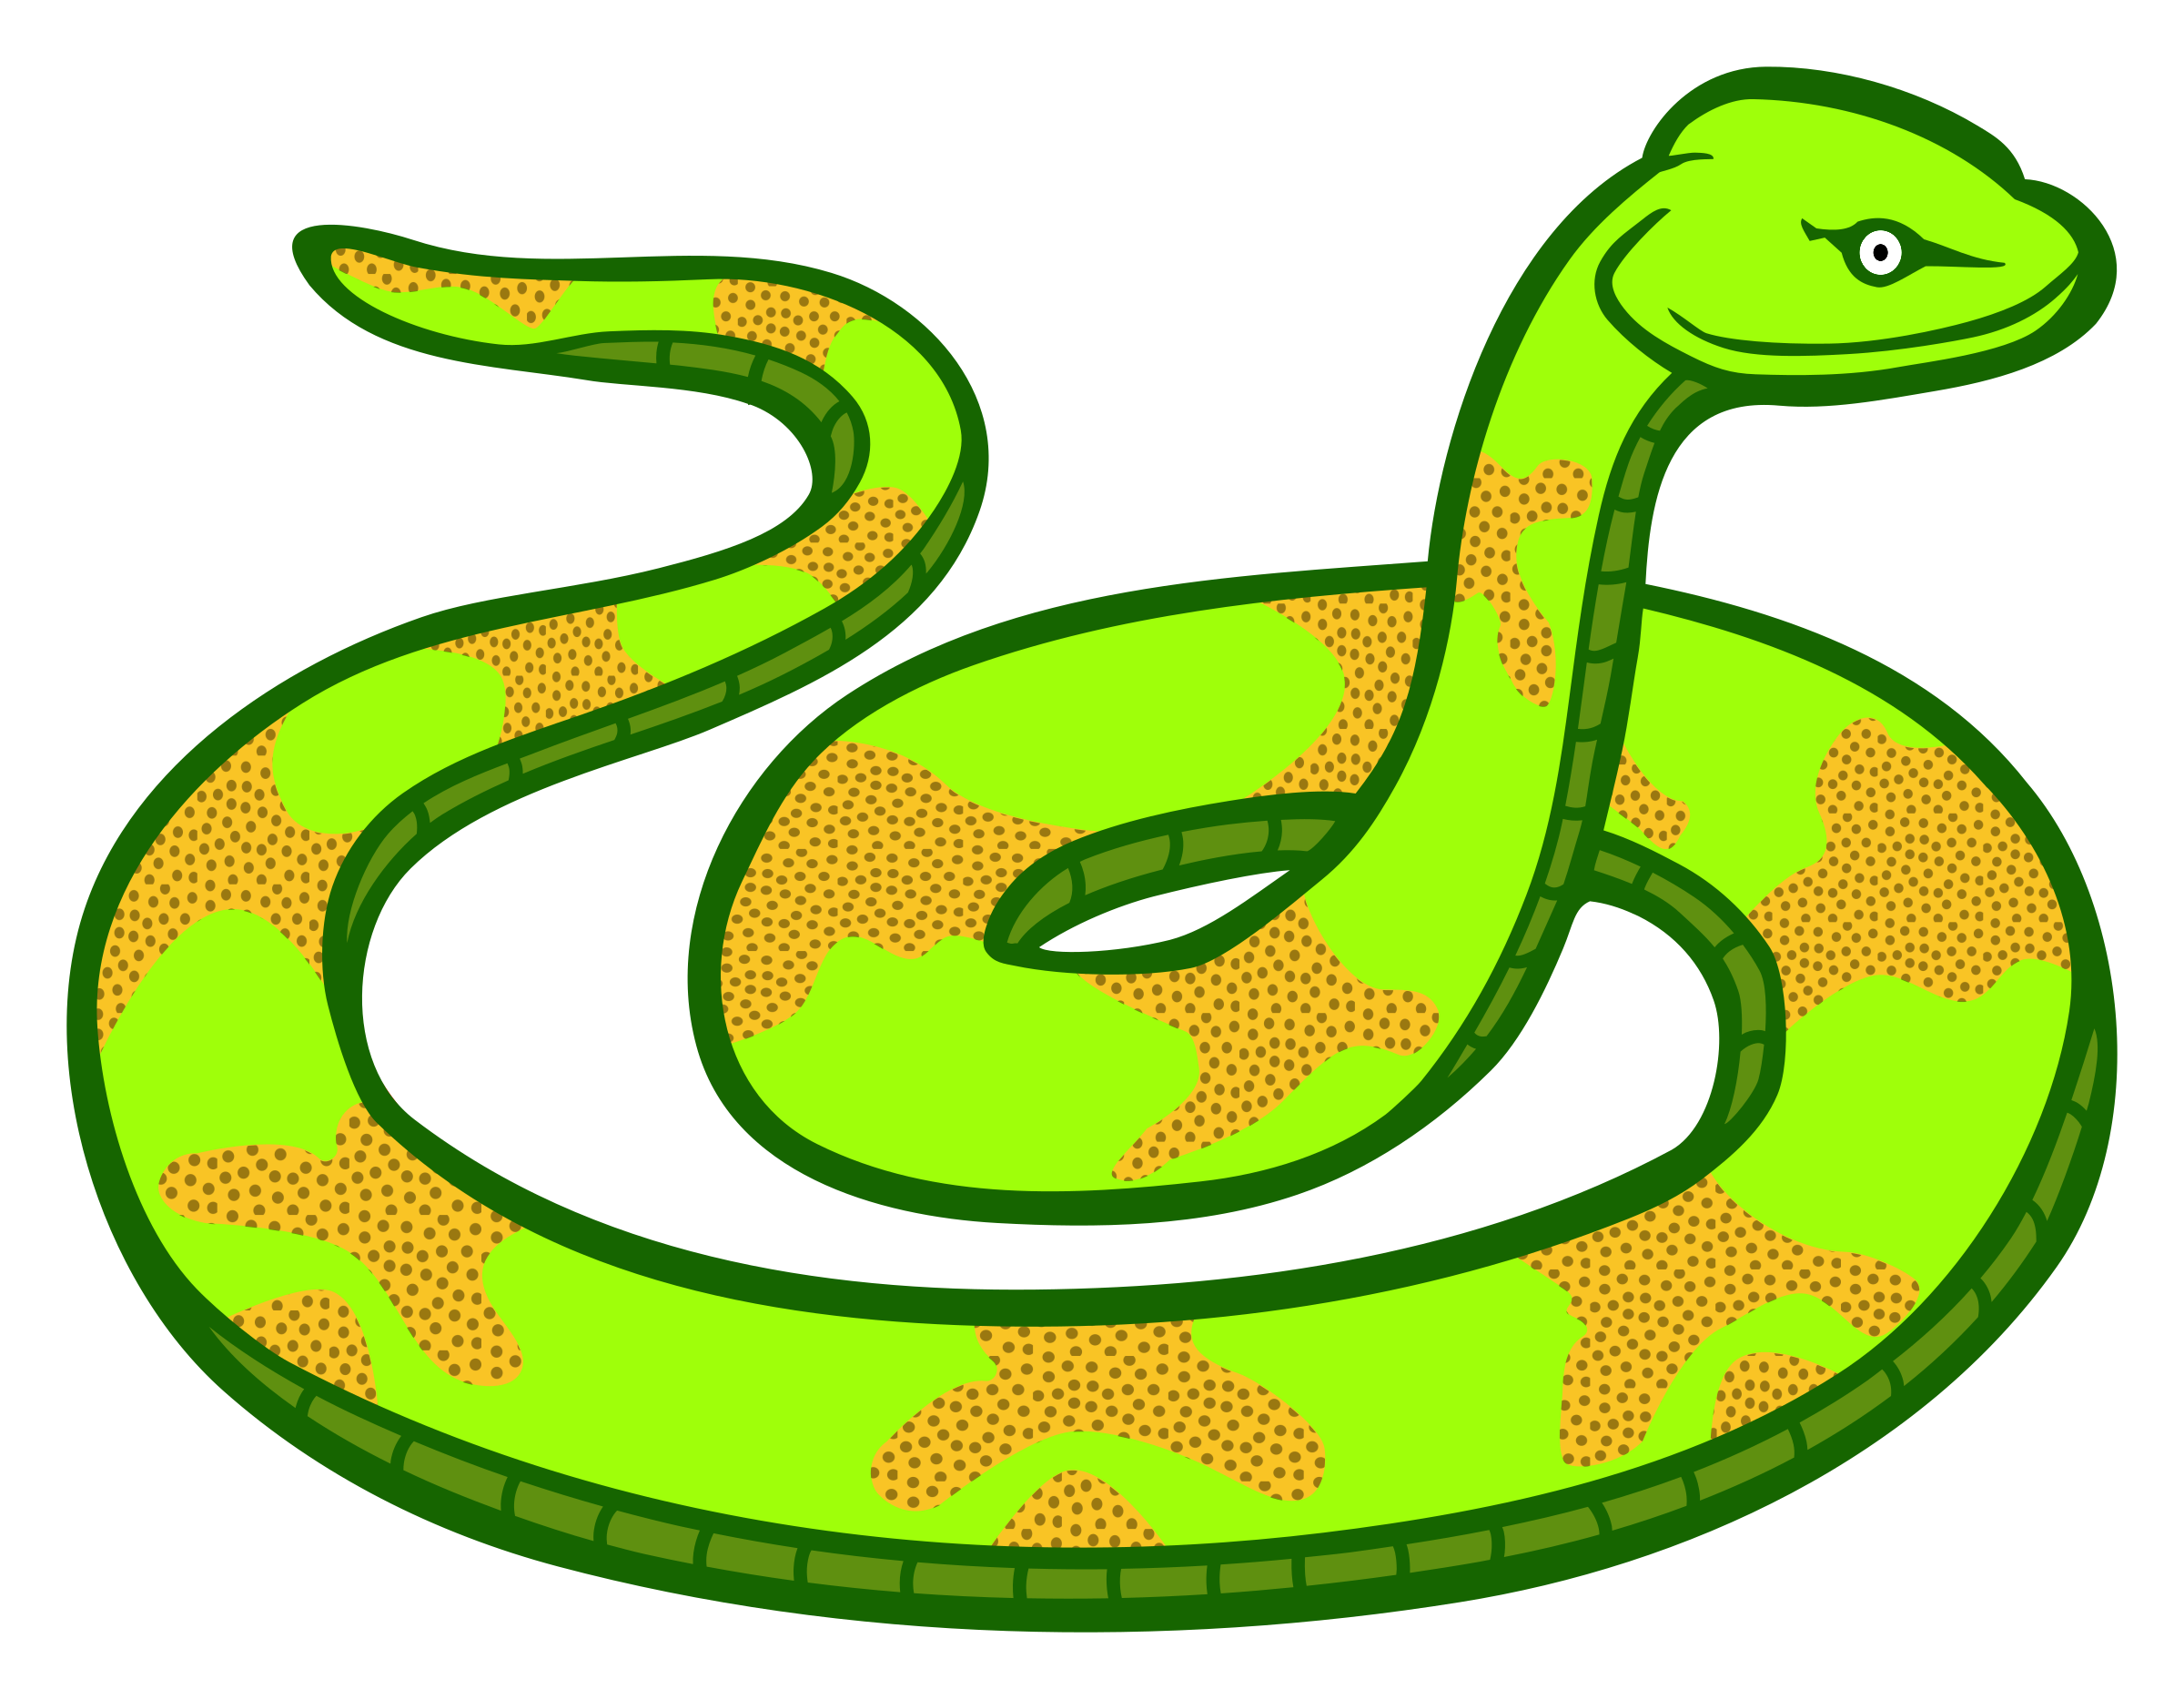 Green Snake Vector Clipart image Free stock photo Public Domain photo CC0 Images